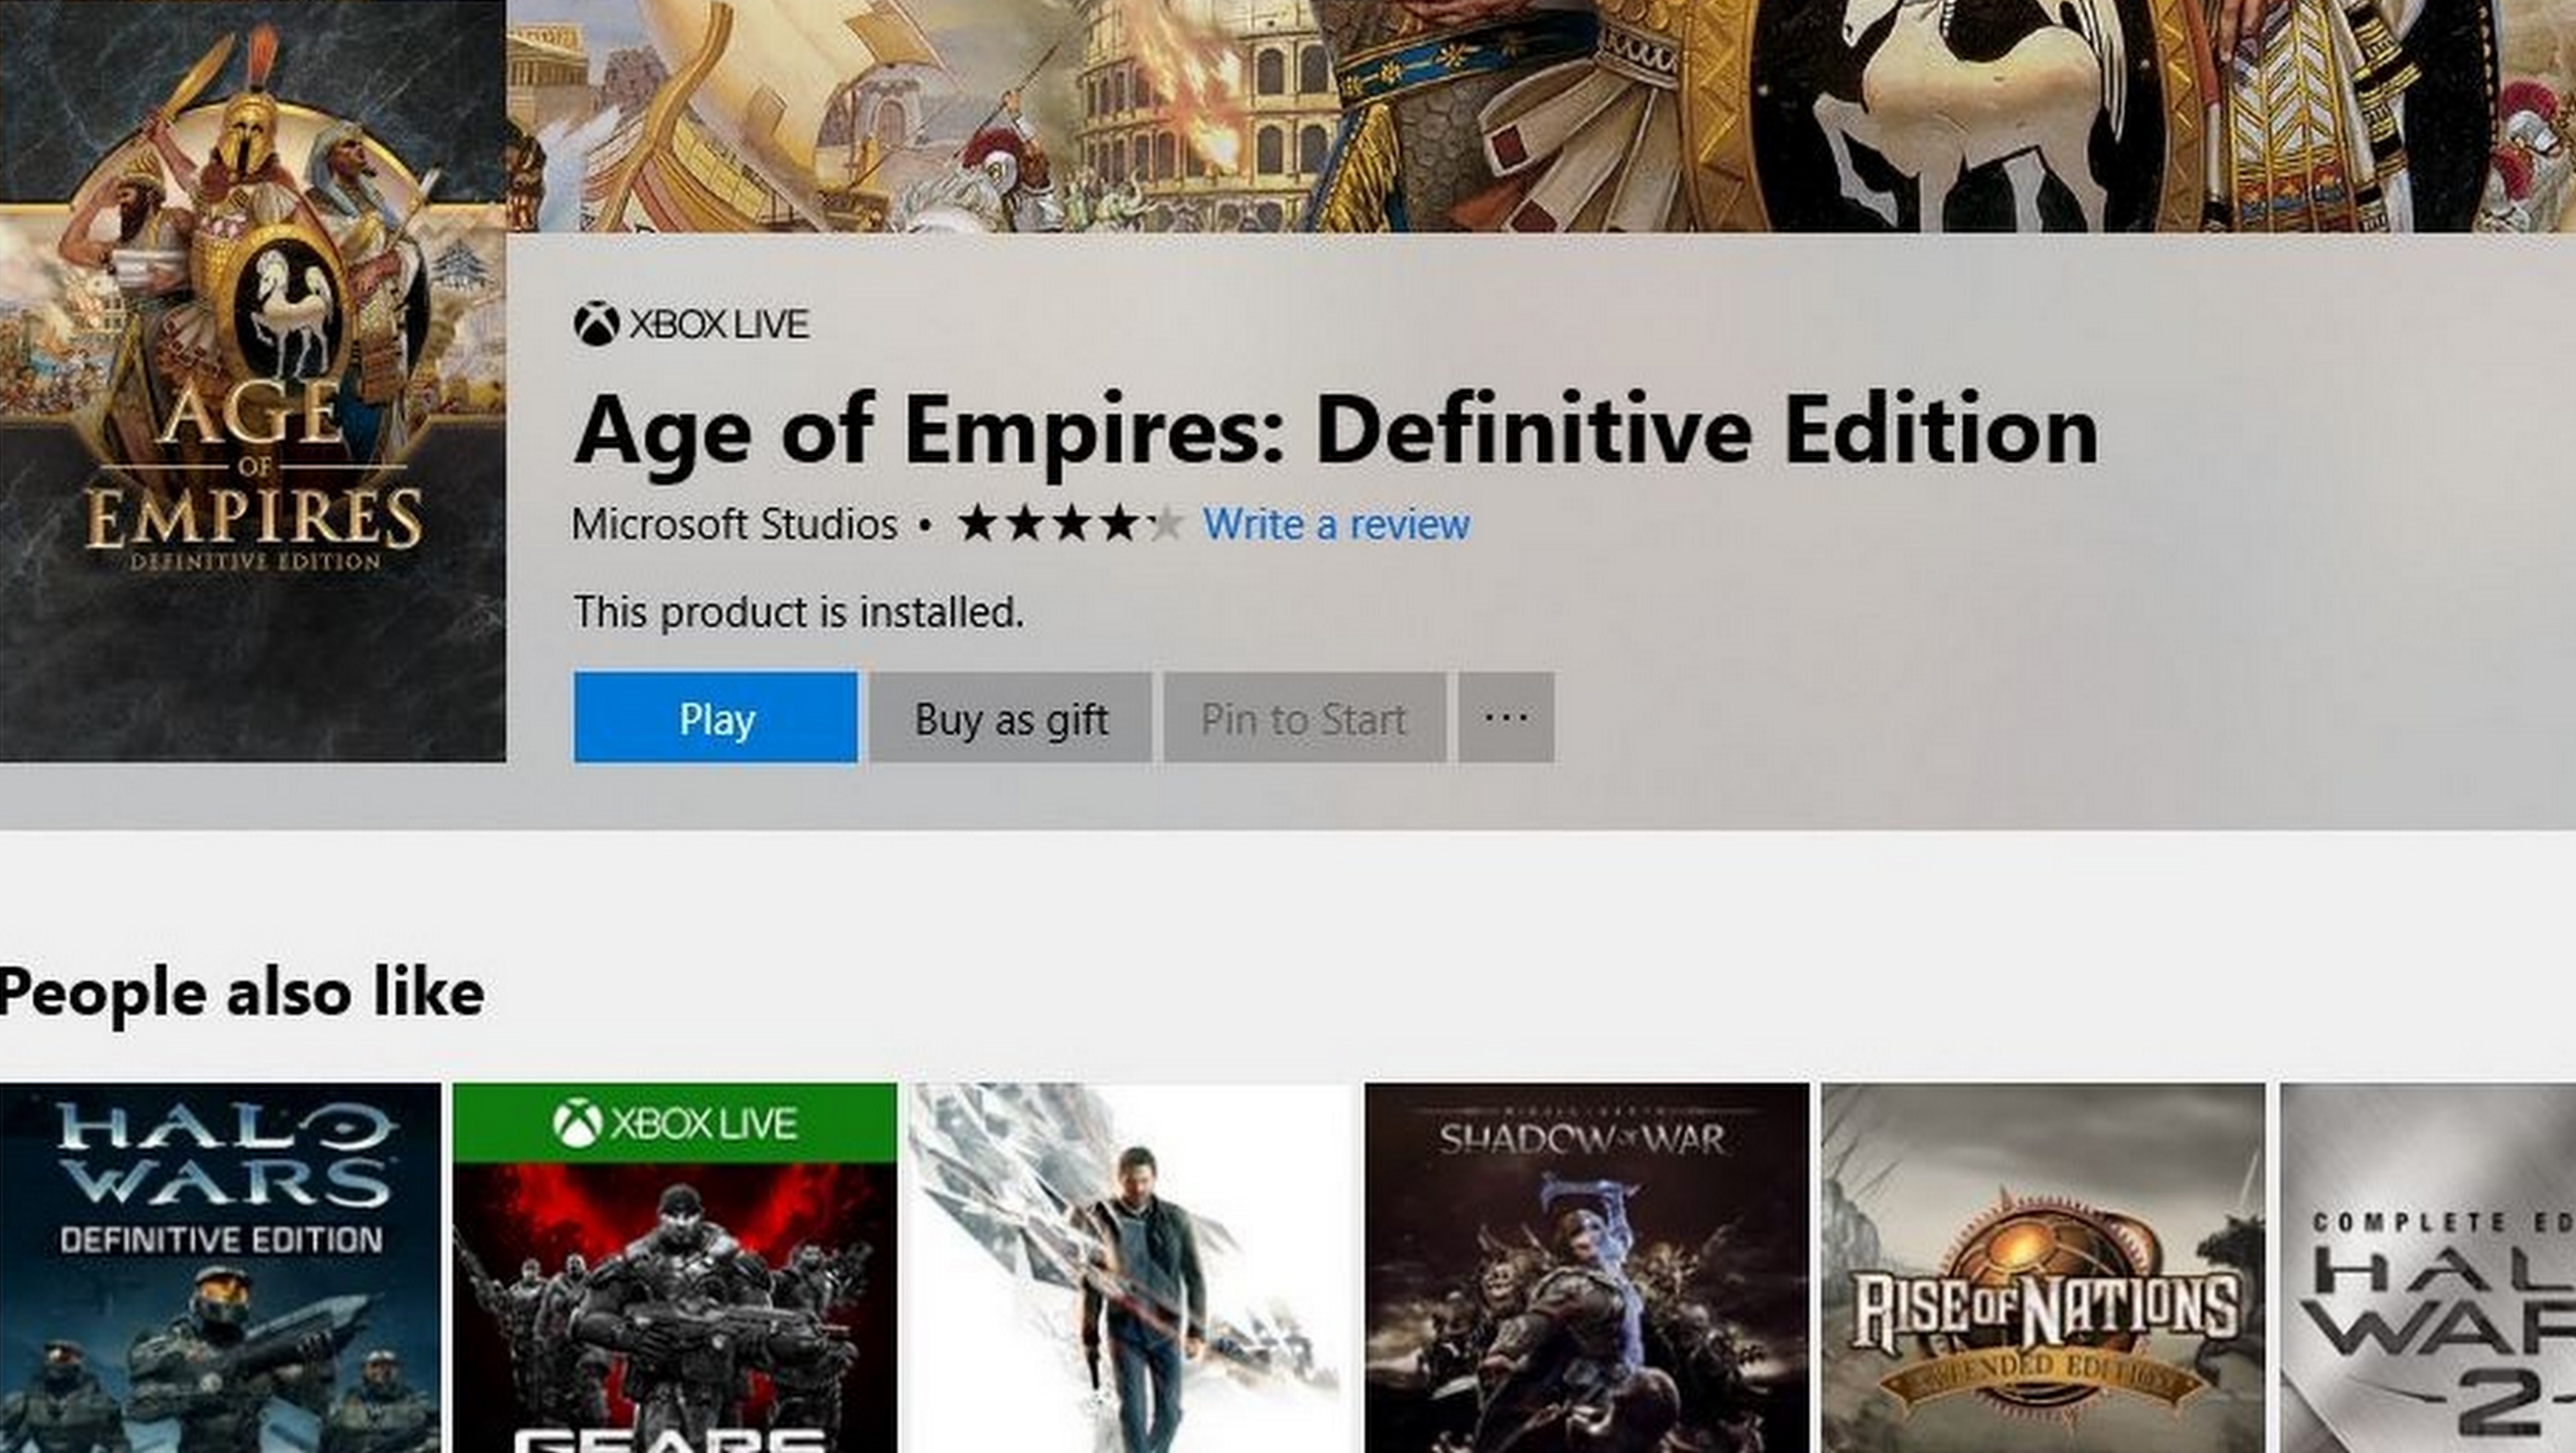 Age of Empires: Definitive Edition page in Microsoft Store